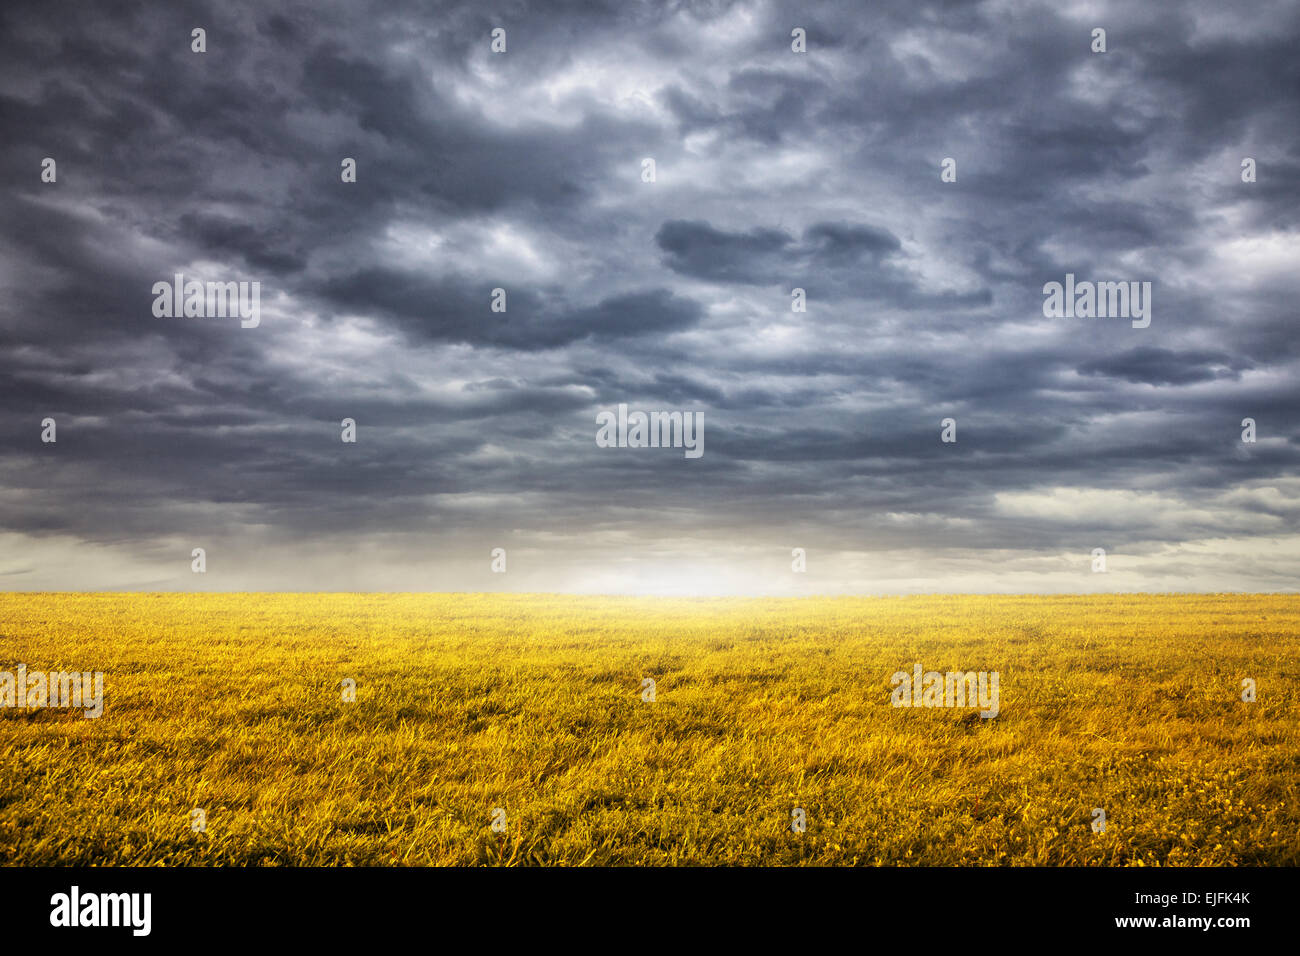 Field with yellow grass at overcast dramatic sky background Stock Photo